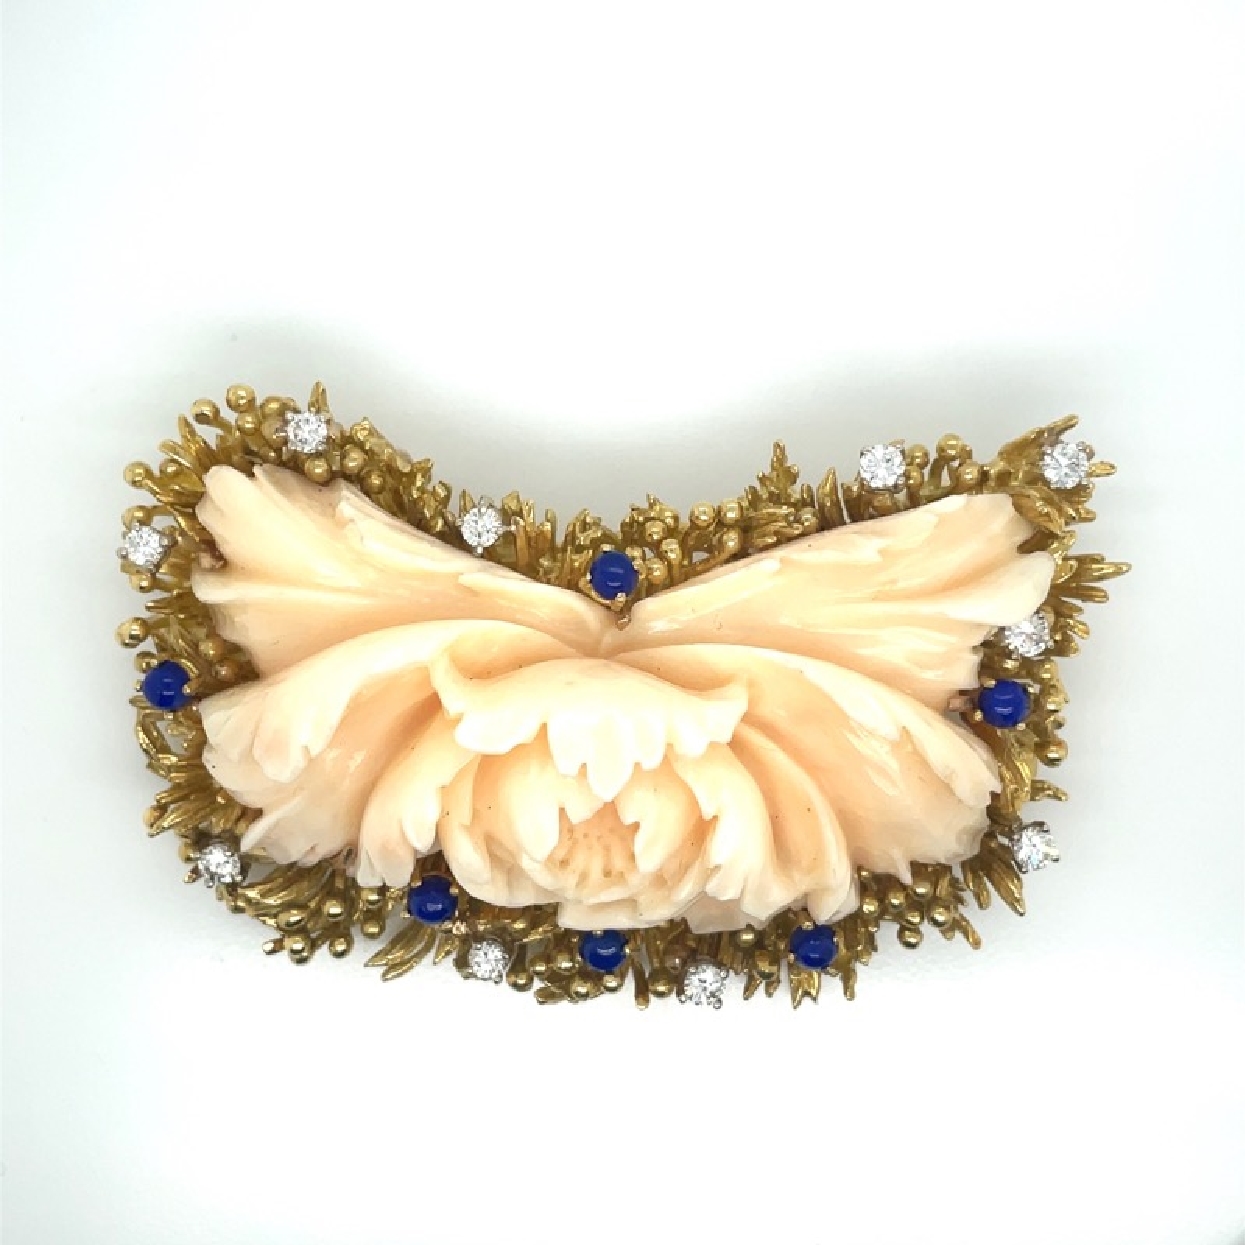 18K Yellow Gold Coral Broach with Lapis and Diamonds 